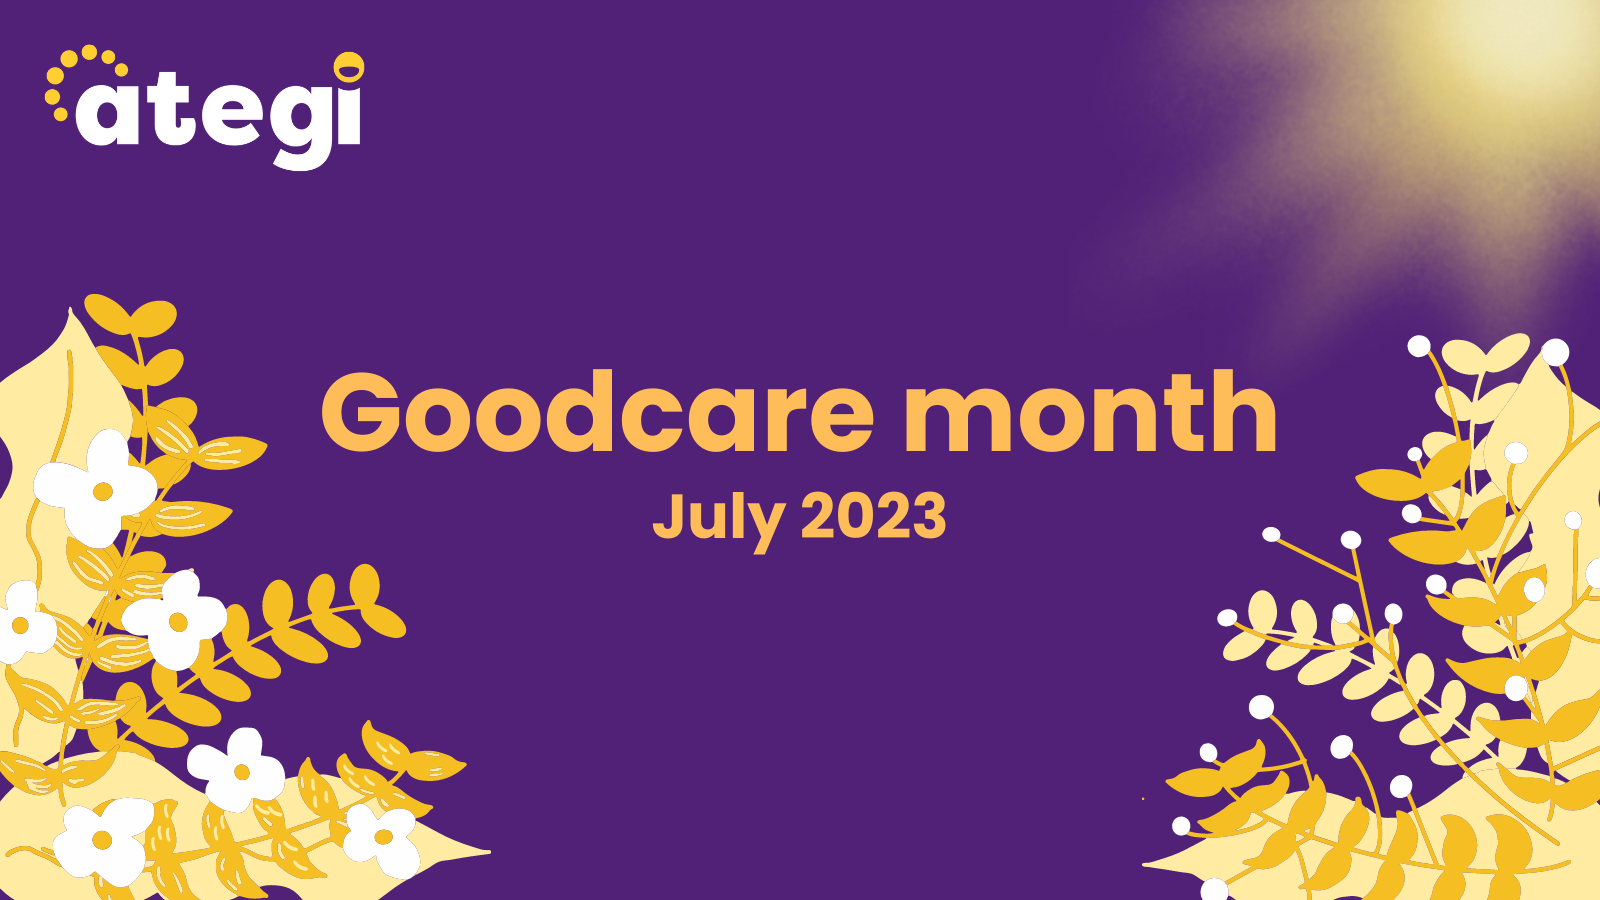 Goodcare month, July 2023